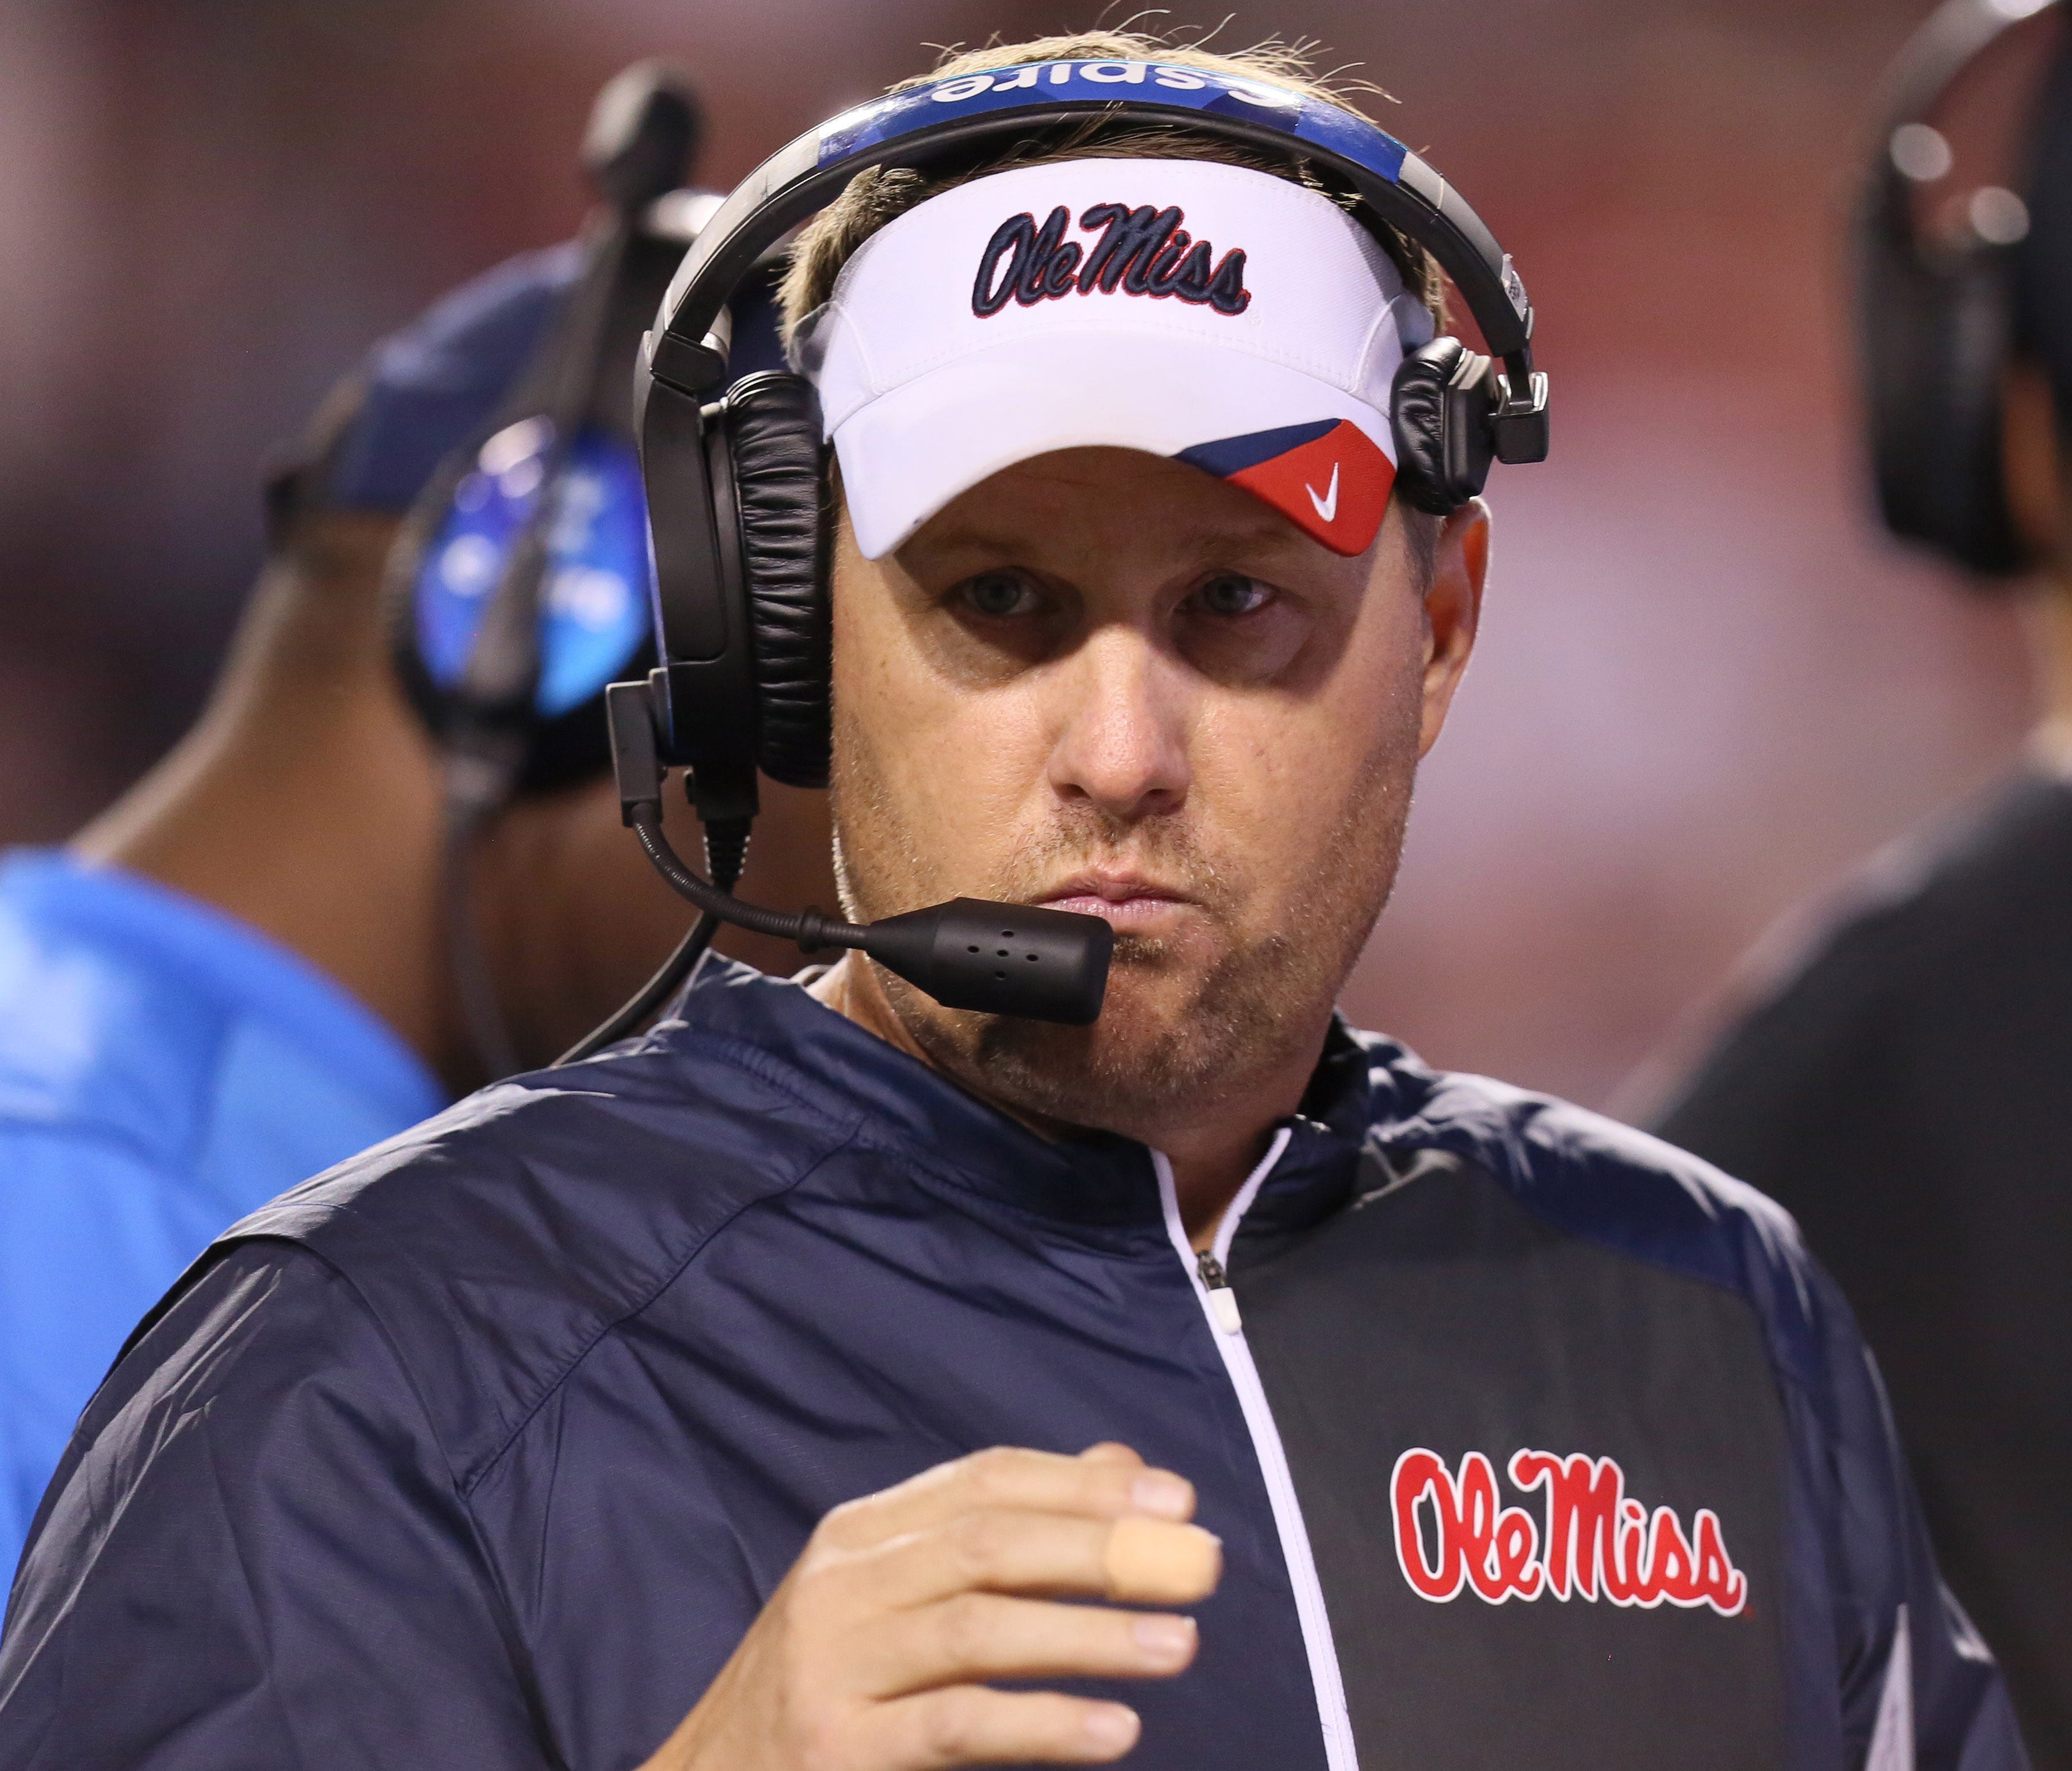 An attorney for former Ole Miss coach Houston Nutt says that the school is avoiding full disclosure of former coach Hugh Freeze's phone records.